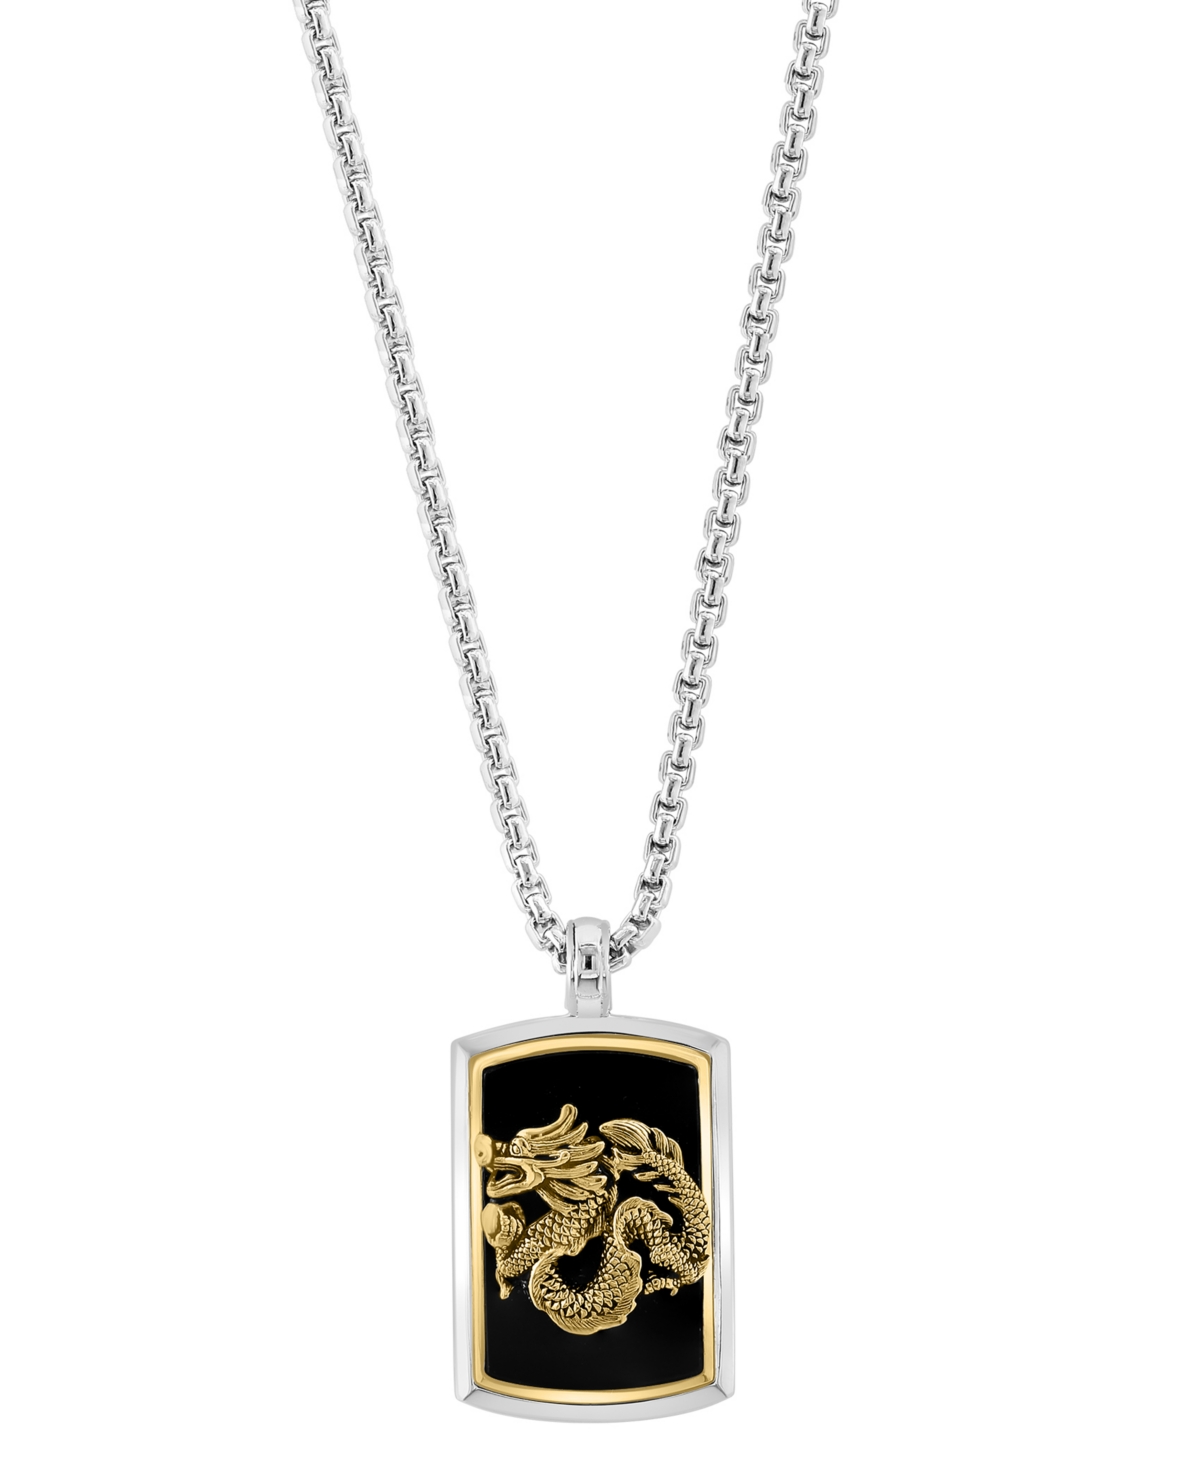 Effy Men's Onyx Dragon Dog Tag 22" Pendant Necklace in Sterling Silver & 14k Gold-Plate - Silver